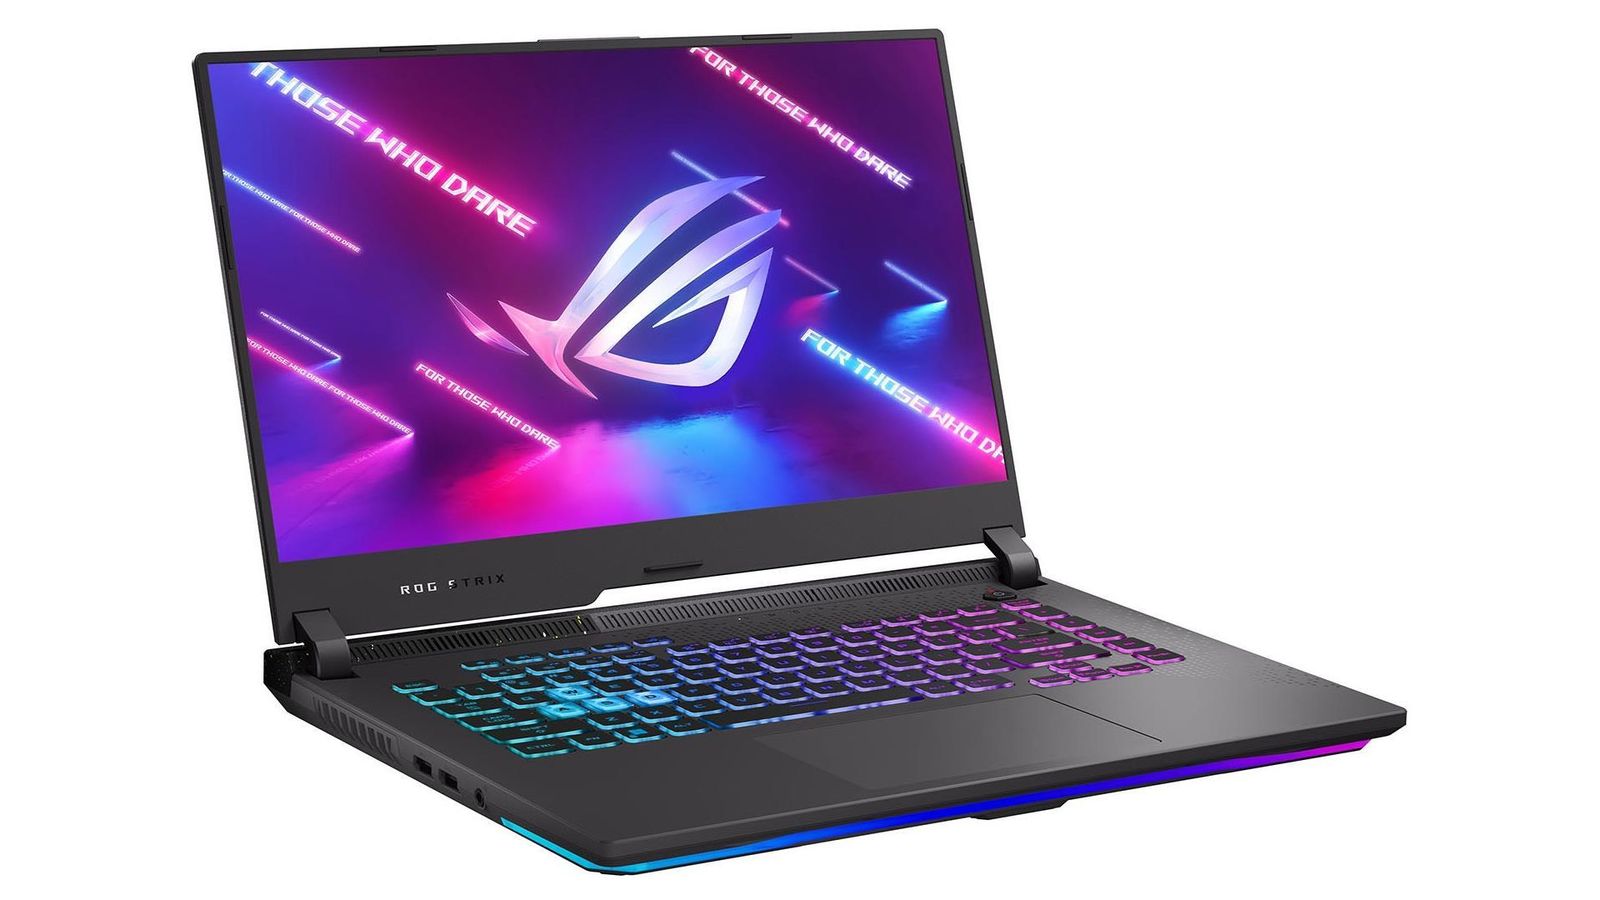 Best Redfall gaming laptop - ASUS ROG Strix G15 product image of a dark grey ASUS laptop featuring pink, purple, and blue backlit keys, lighting, and display.